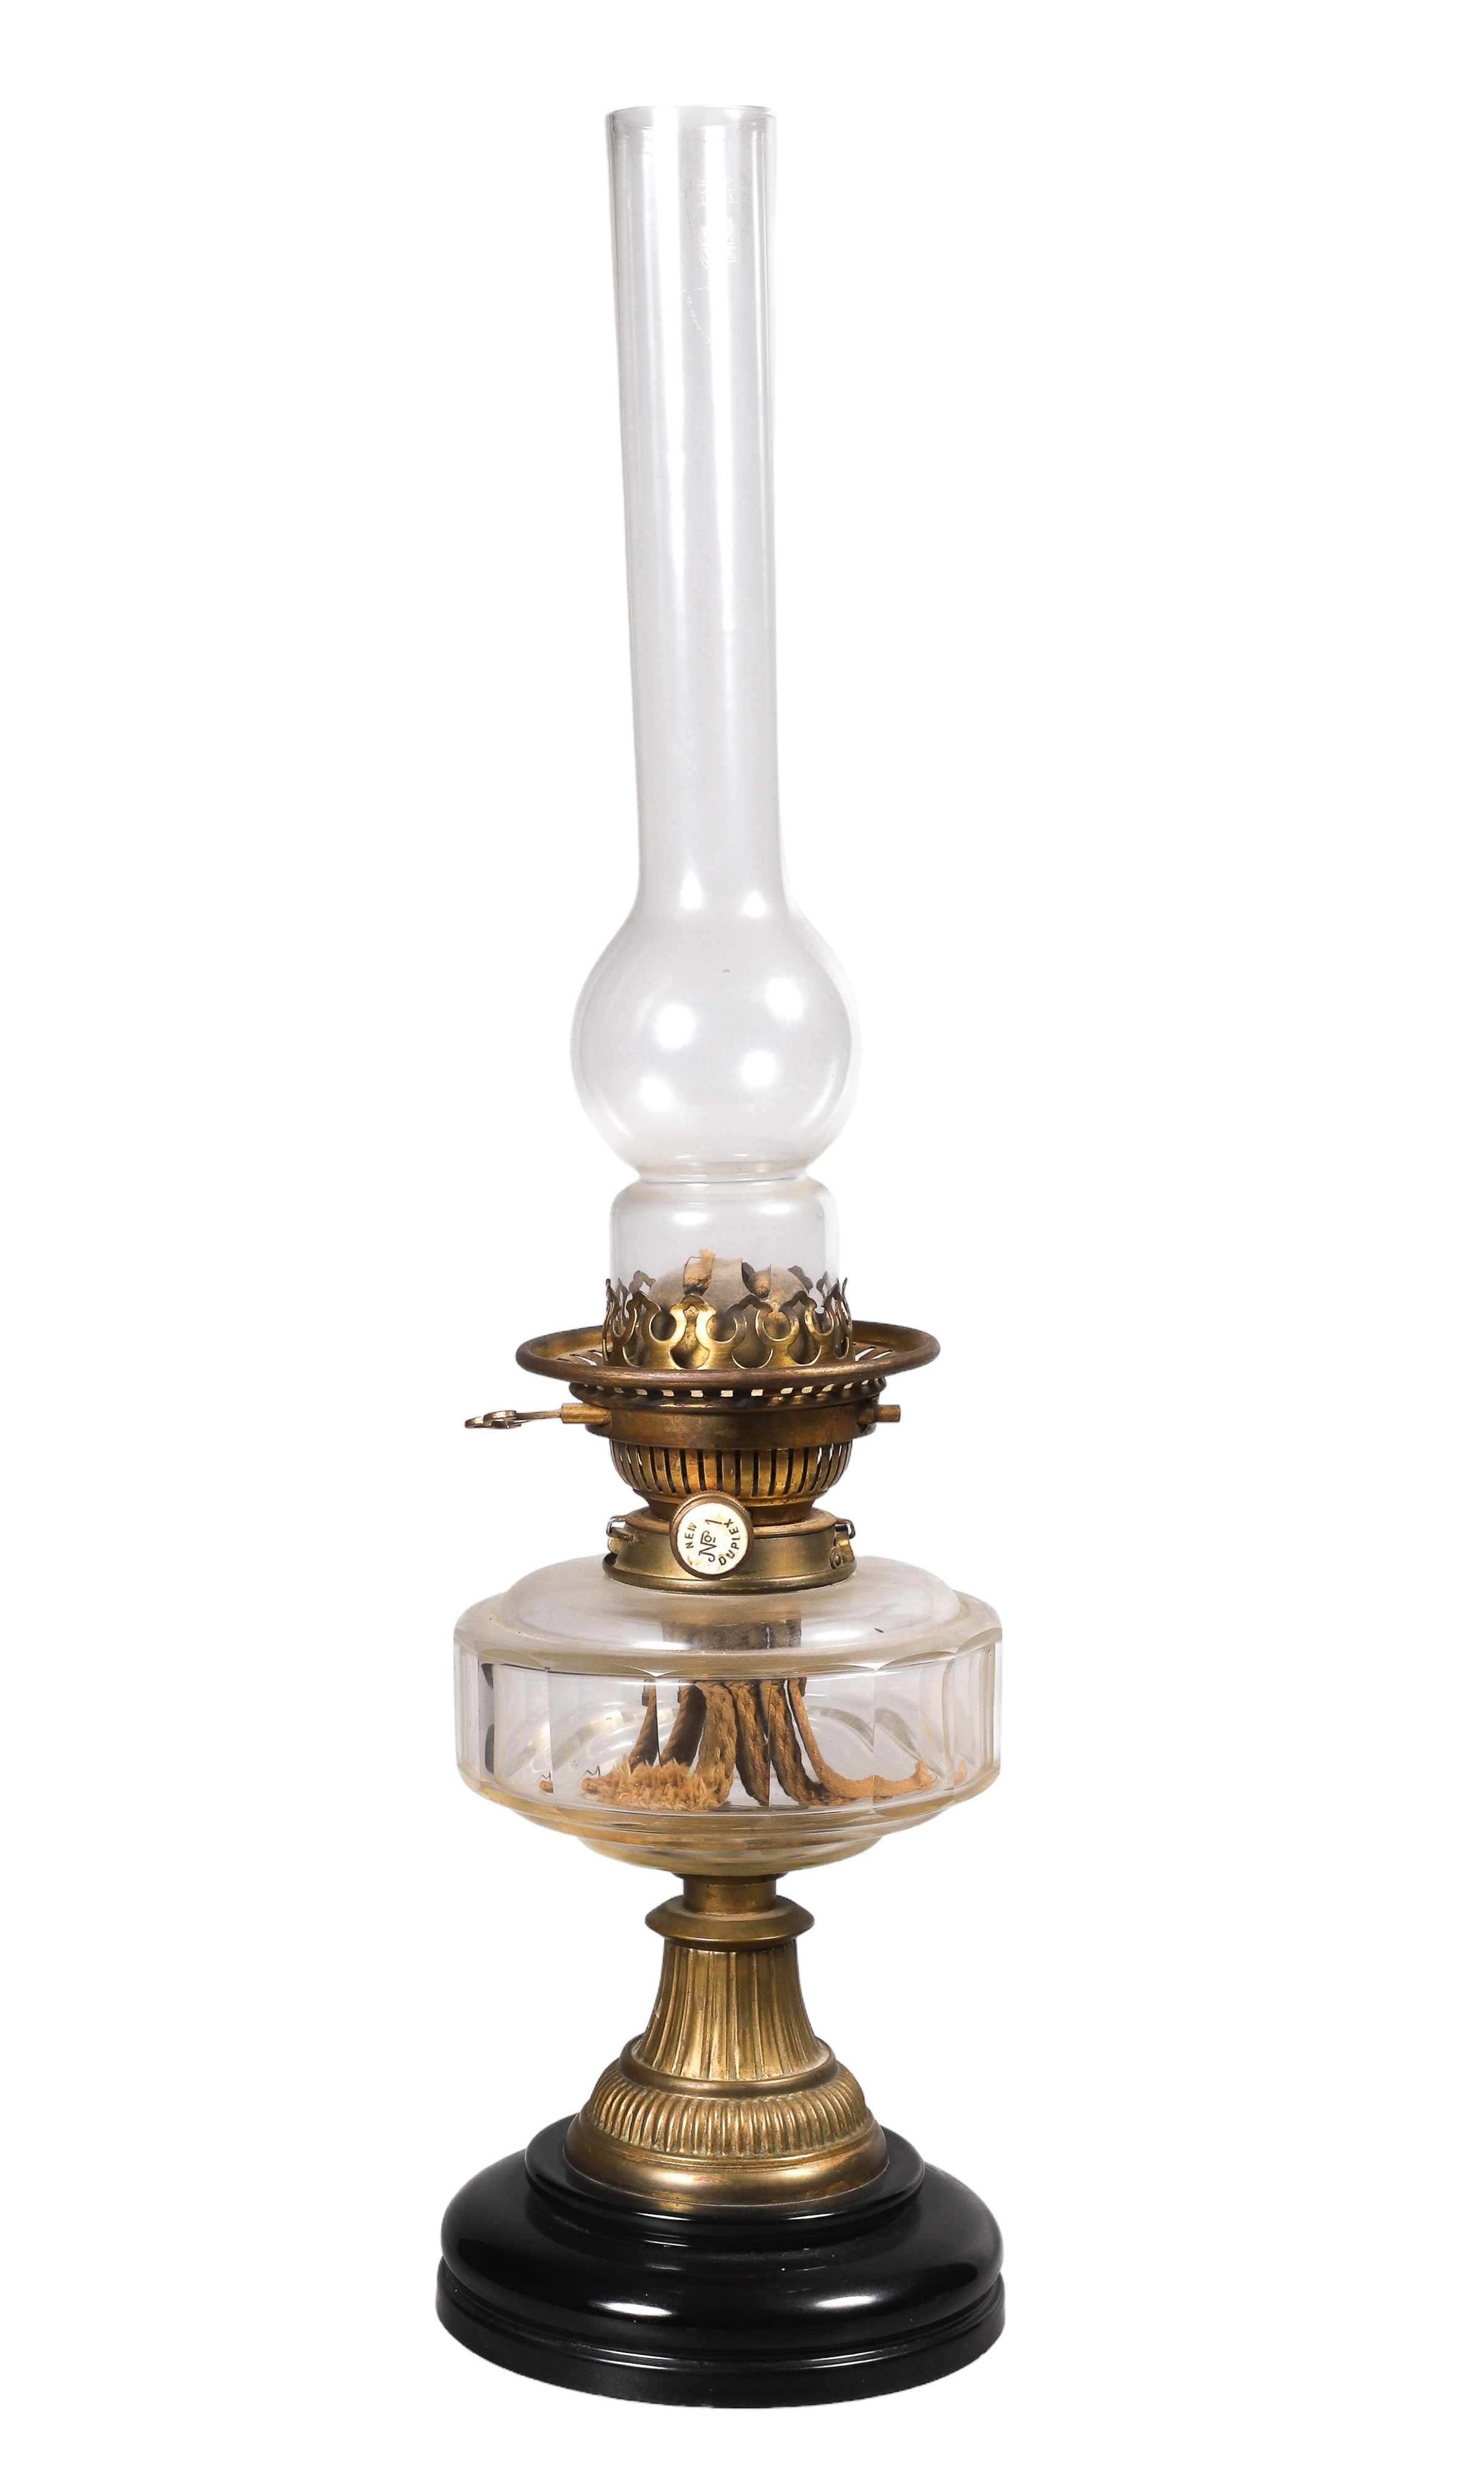 Oil lamp with glass font gilt 2e1a82